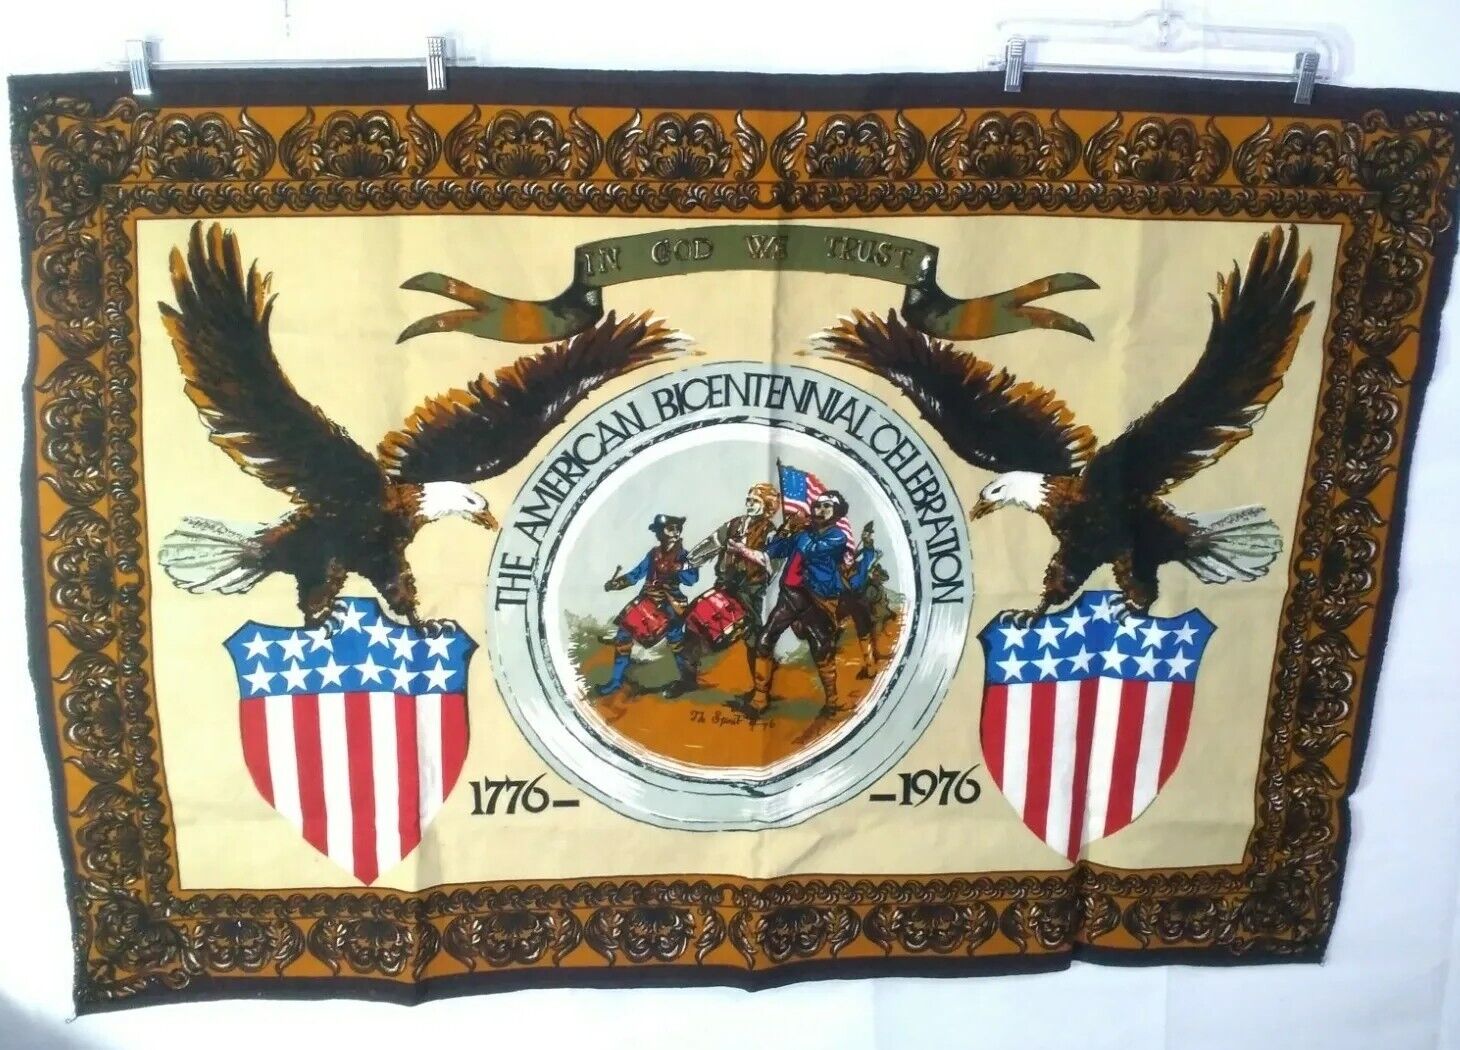  American Bicentennial Colonial 1776-1976 Vintage Tapestry Wall Hanging 60X38 